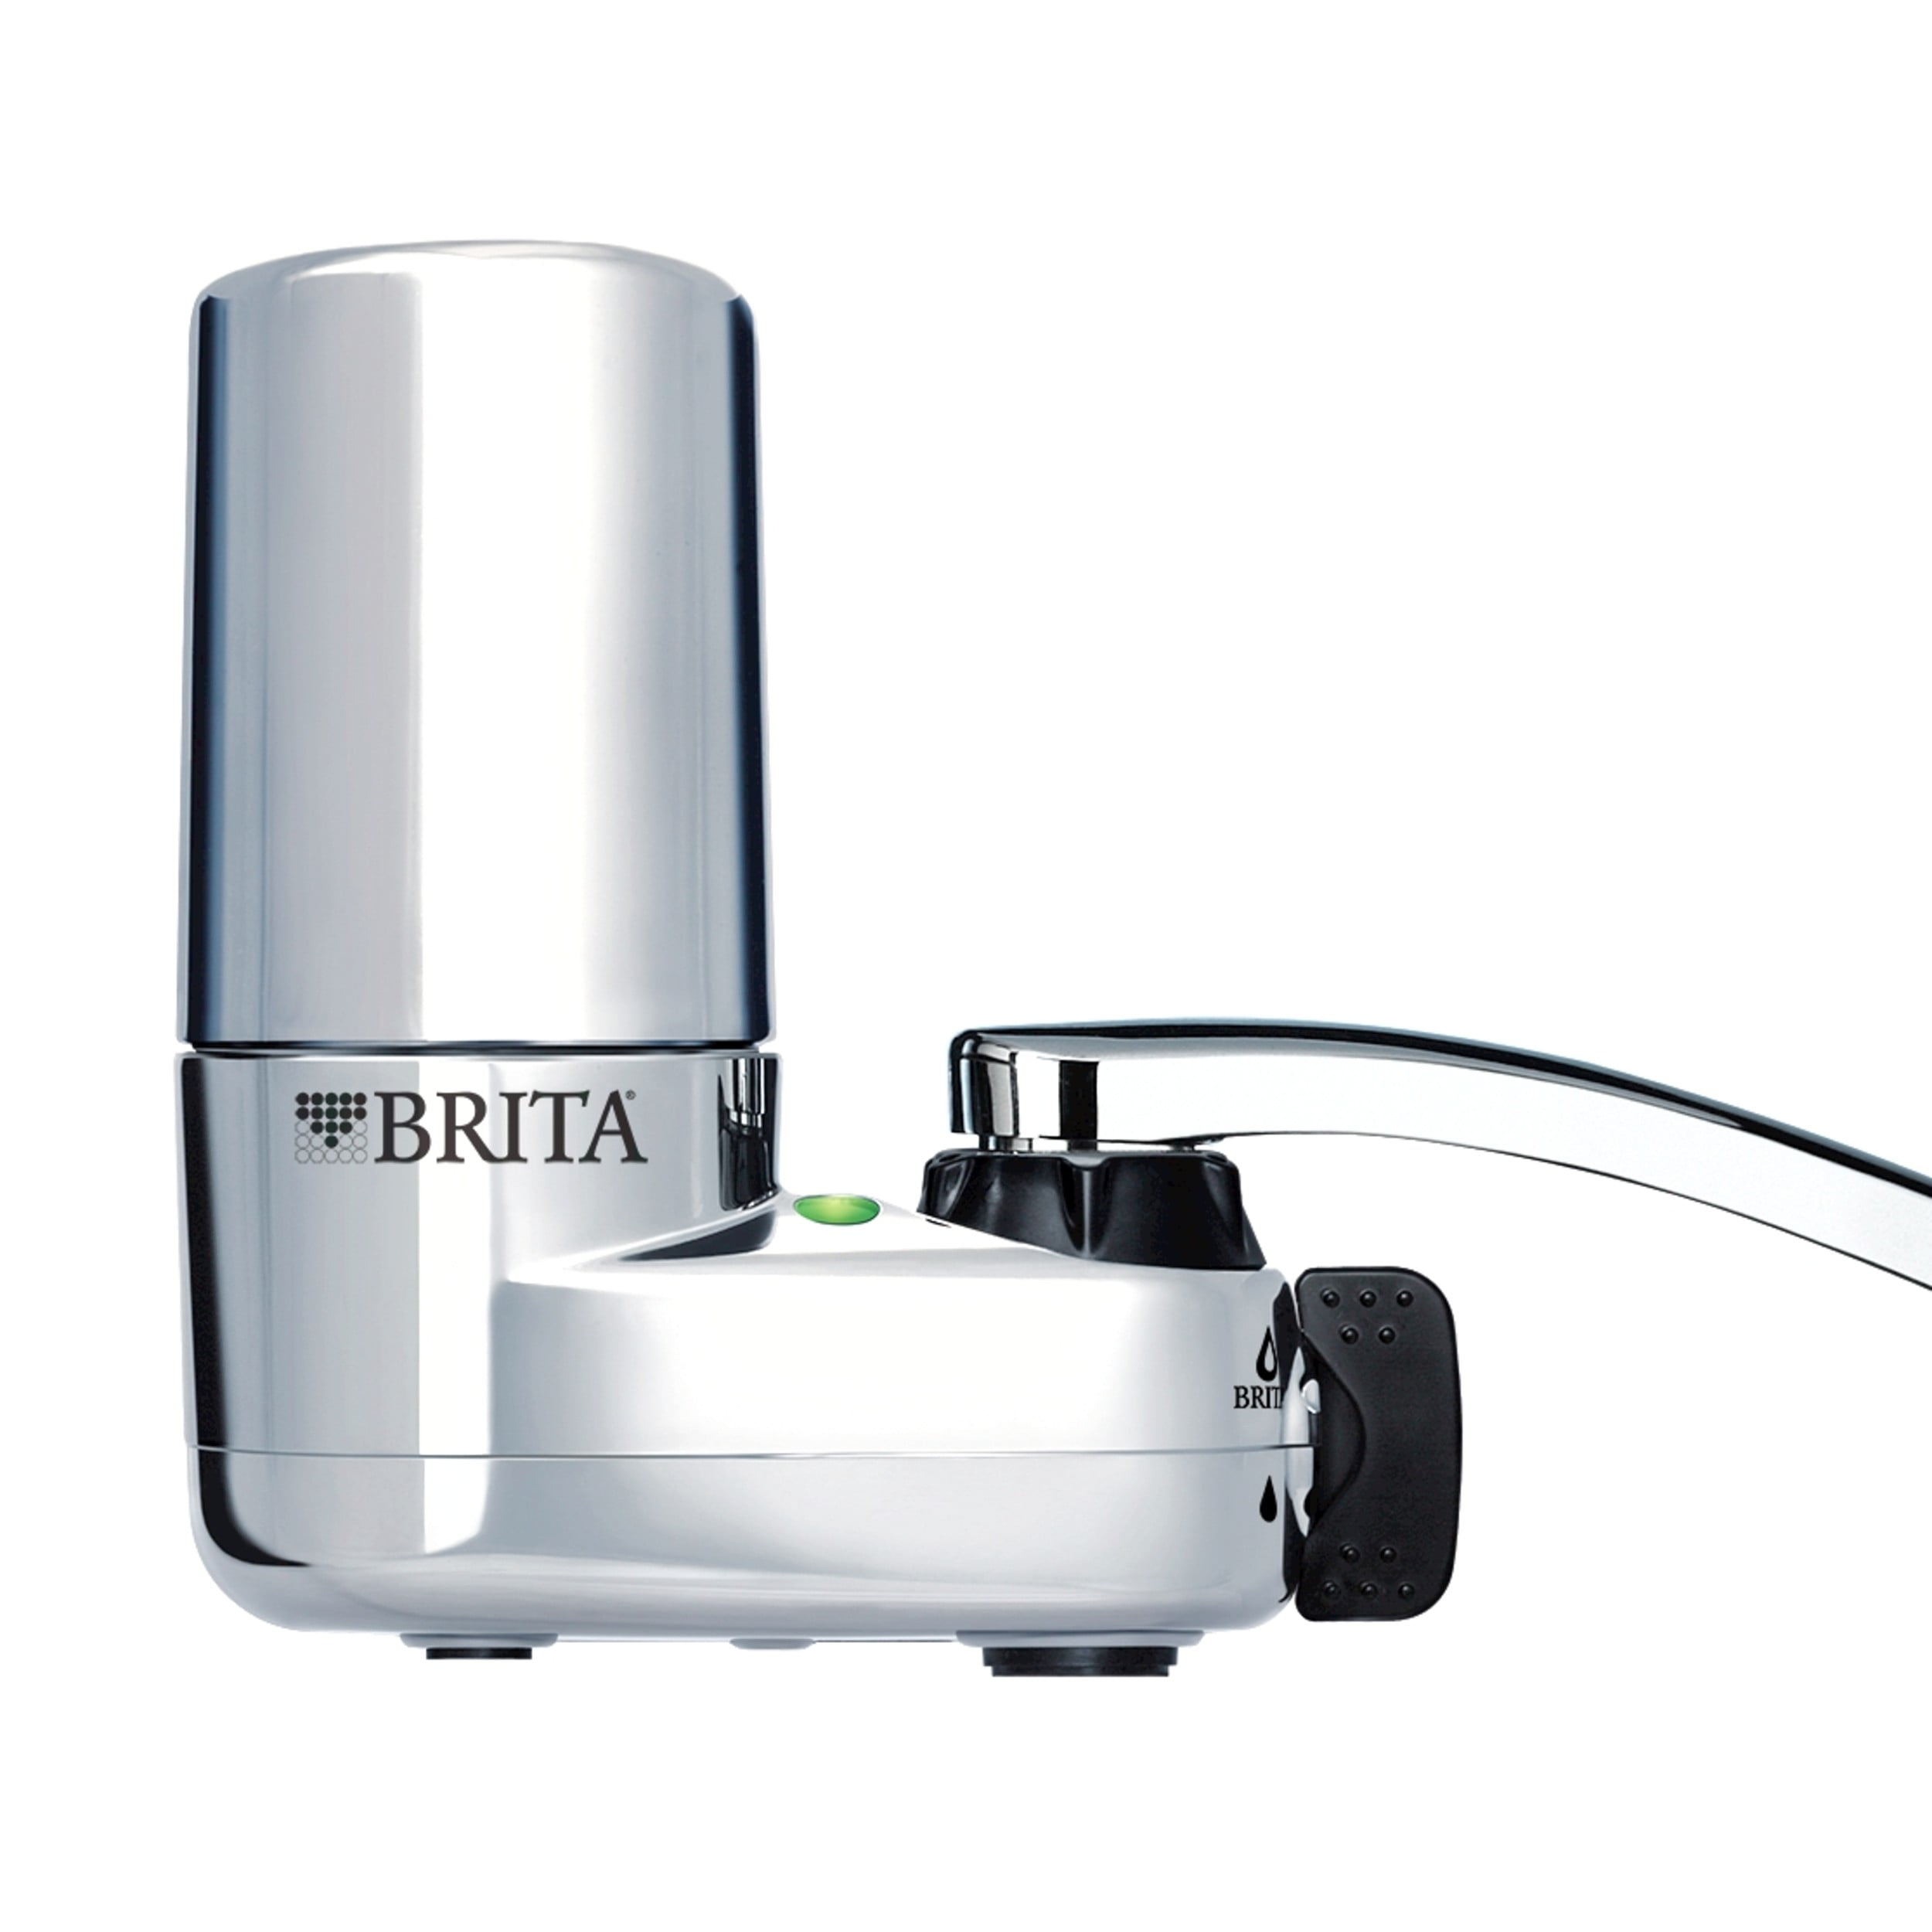 Brita Tap Water Faucet Filtration System, Reduces Lead - Chrome